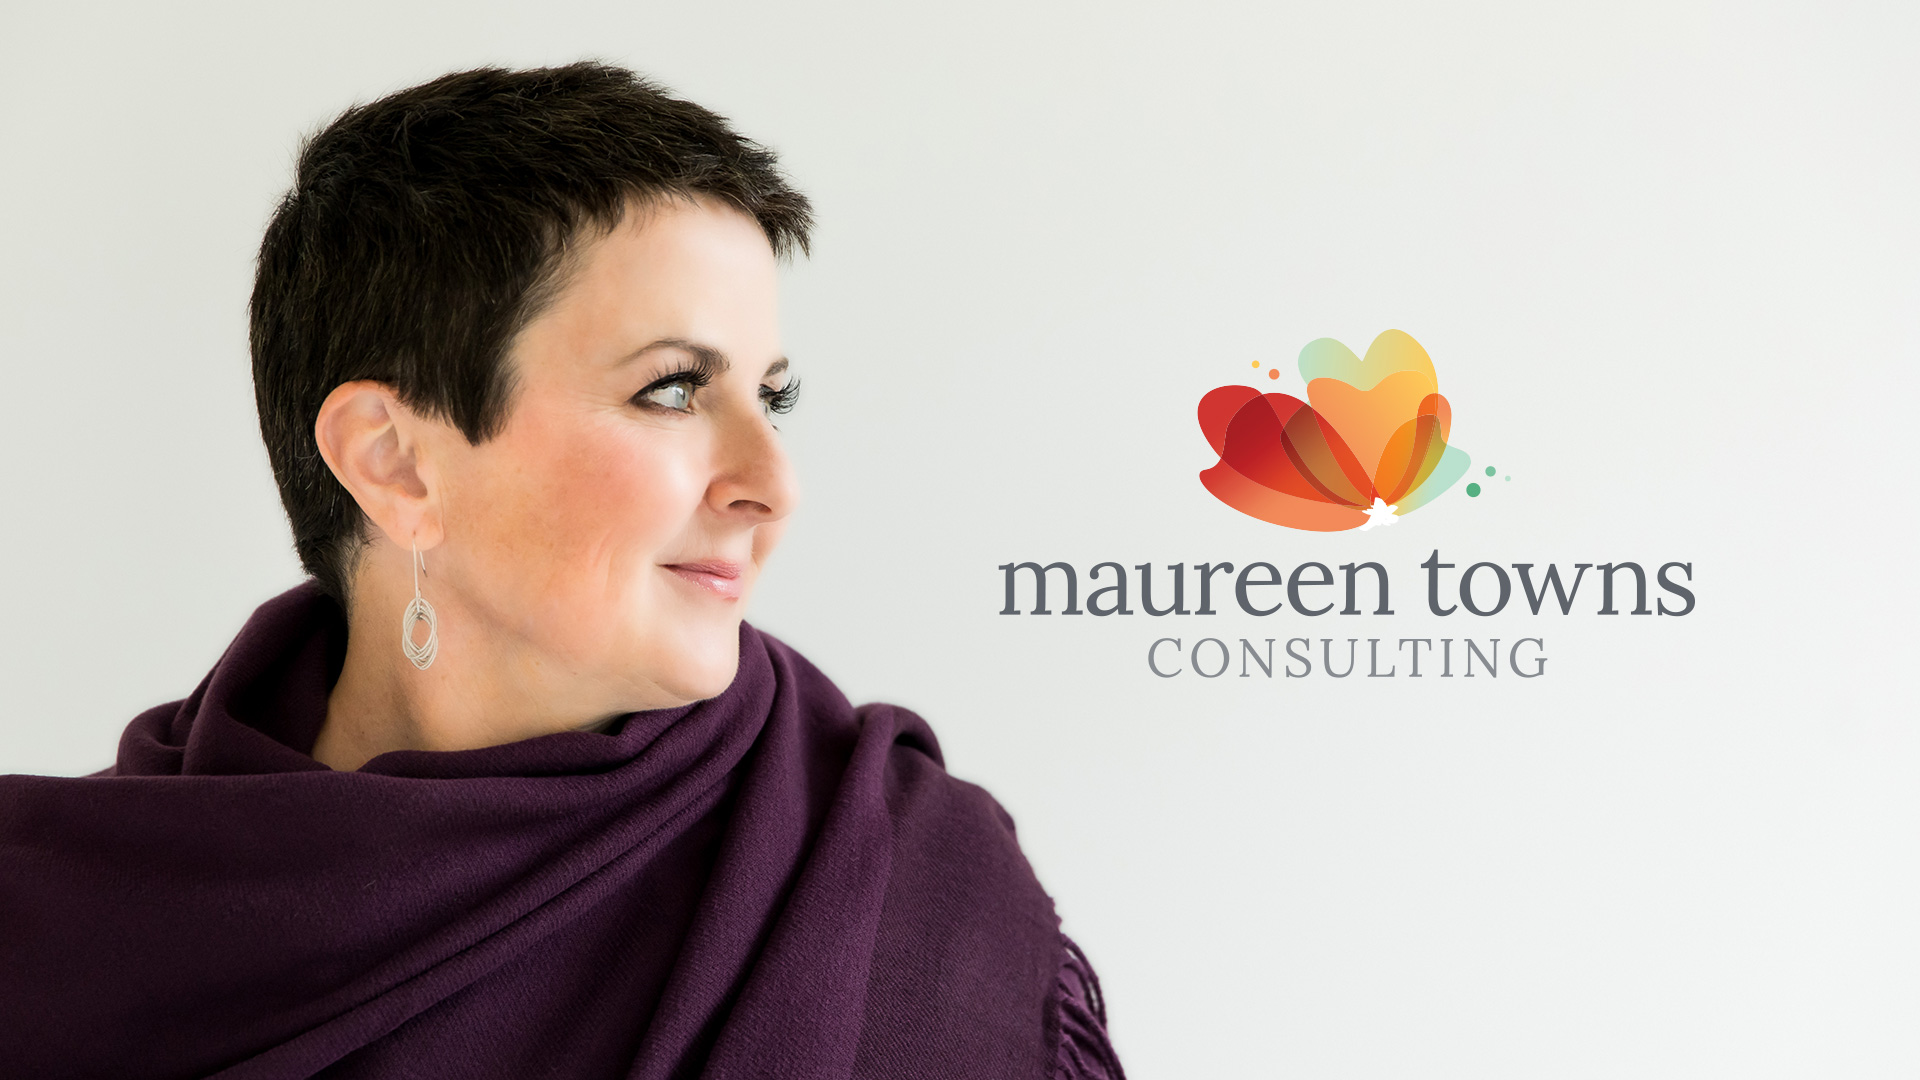 Maureen Towns Consulting